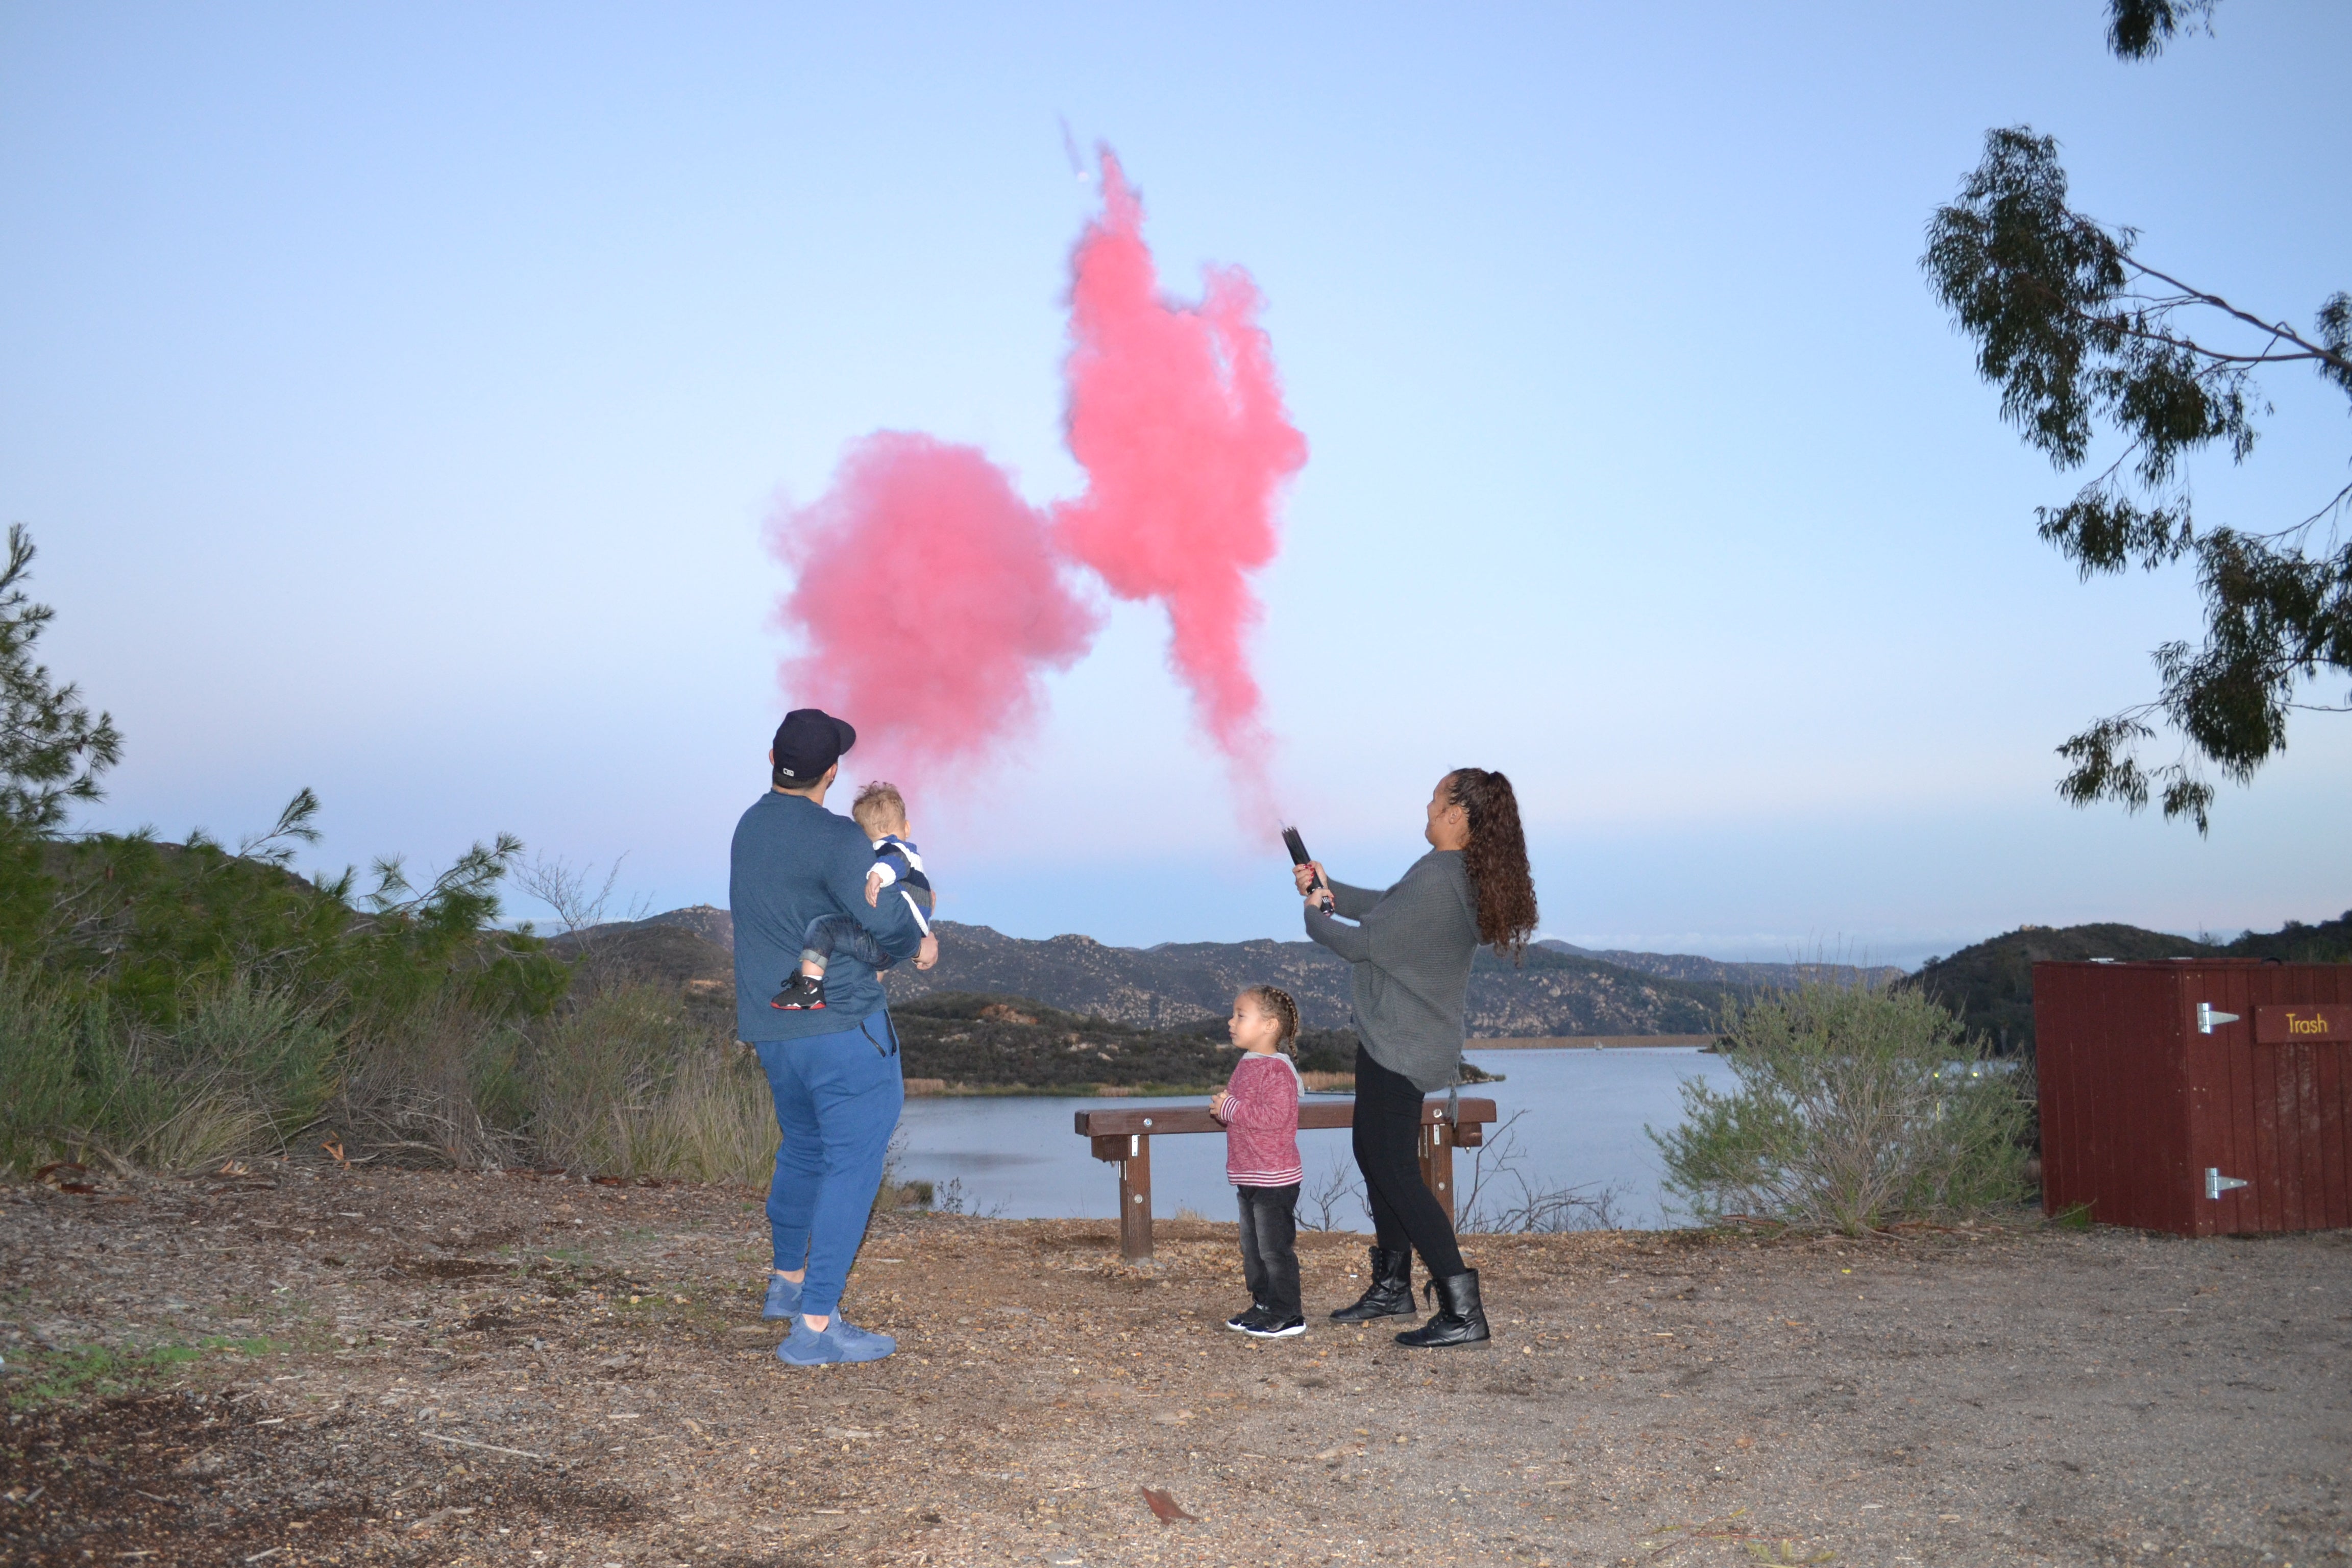 Legend & Co, Baby Gender Reveal Powder Cannons | Air Powered | Included  Feature: Small Color Check Window to View Contents (2 Pink & 2 Blue Powder)